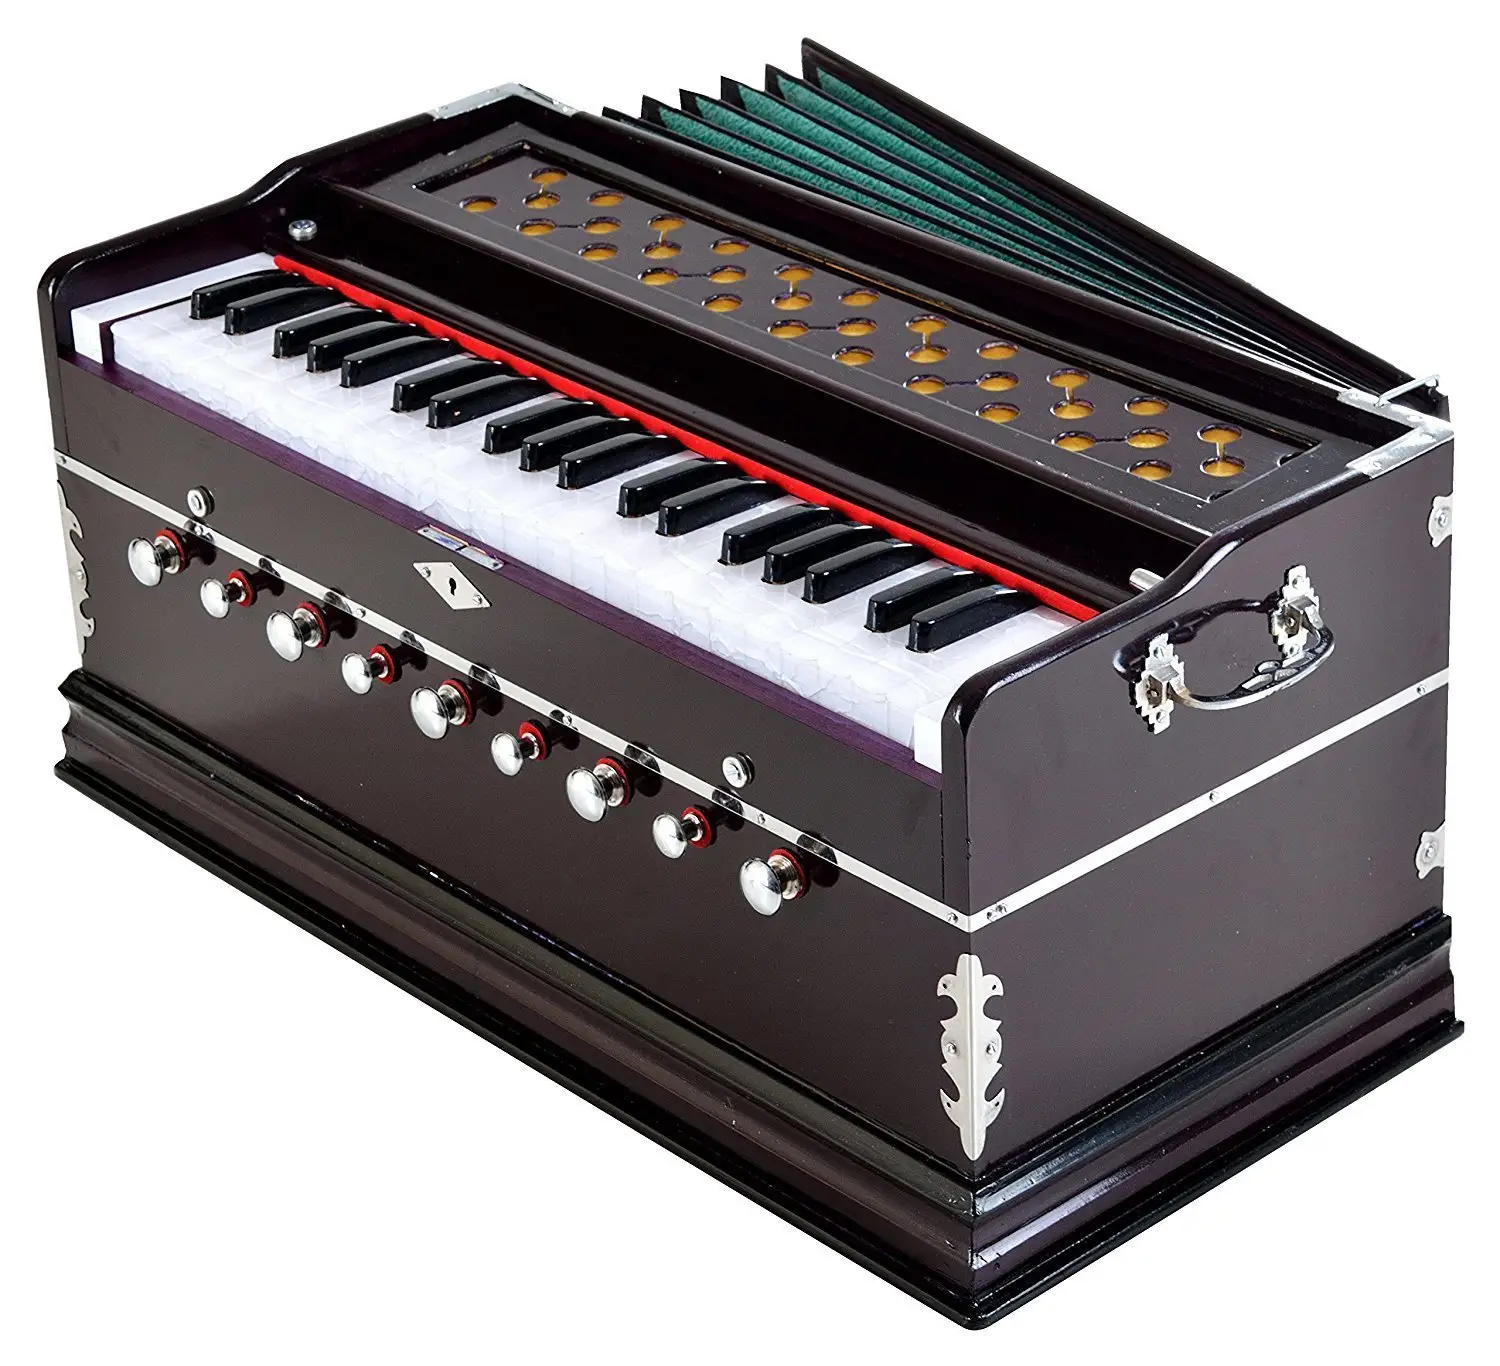 High Rated Wooden Single Reed Harmonium with Wholesale Price in India